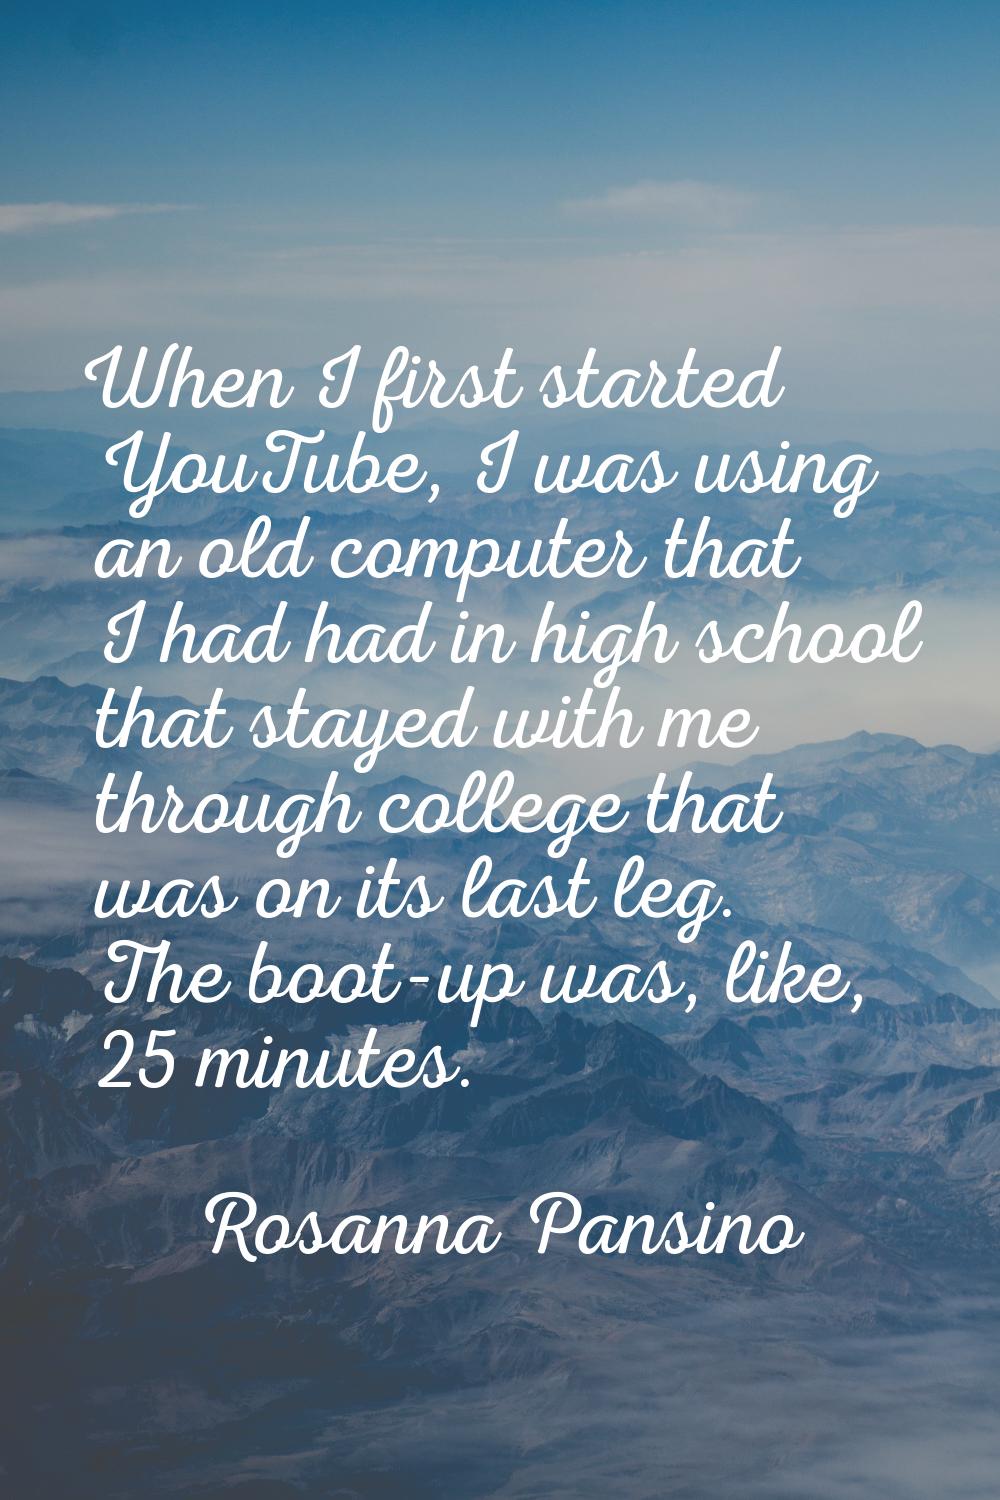 When I first started YouTube, I was using an old computer that I had had in high school that stayed